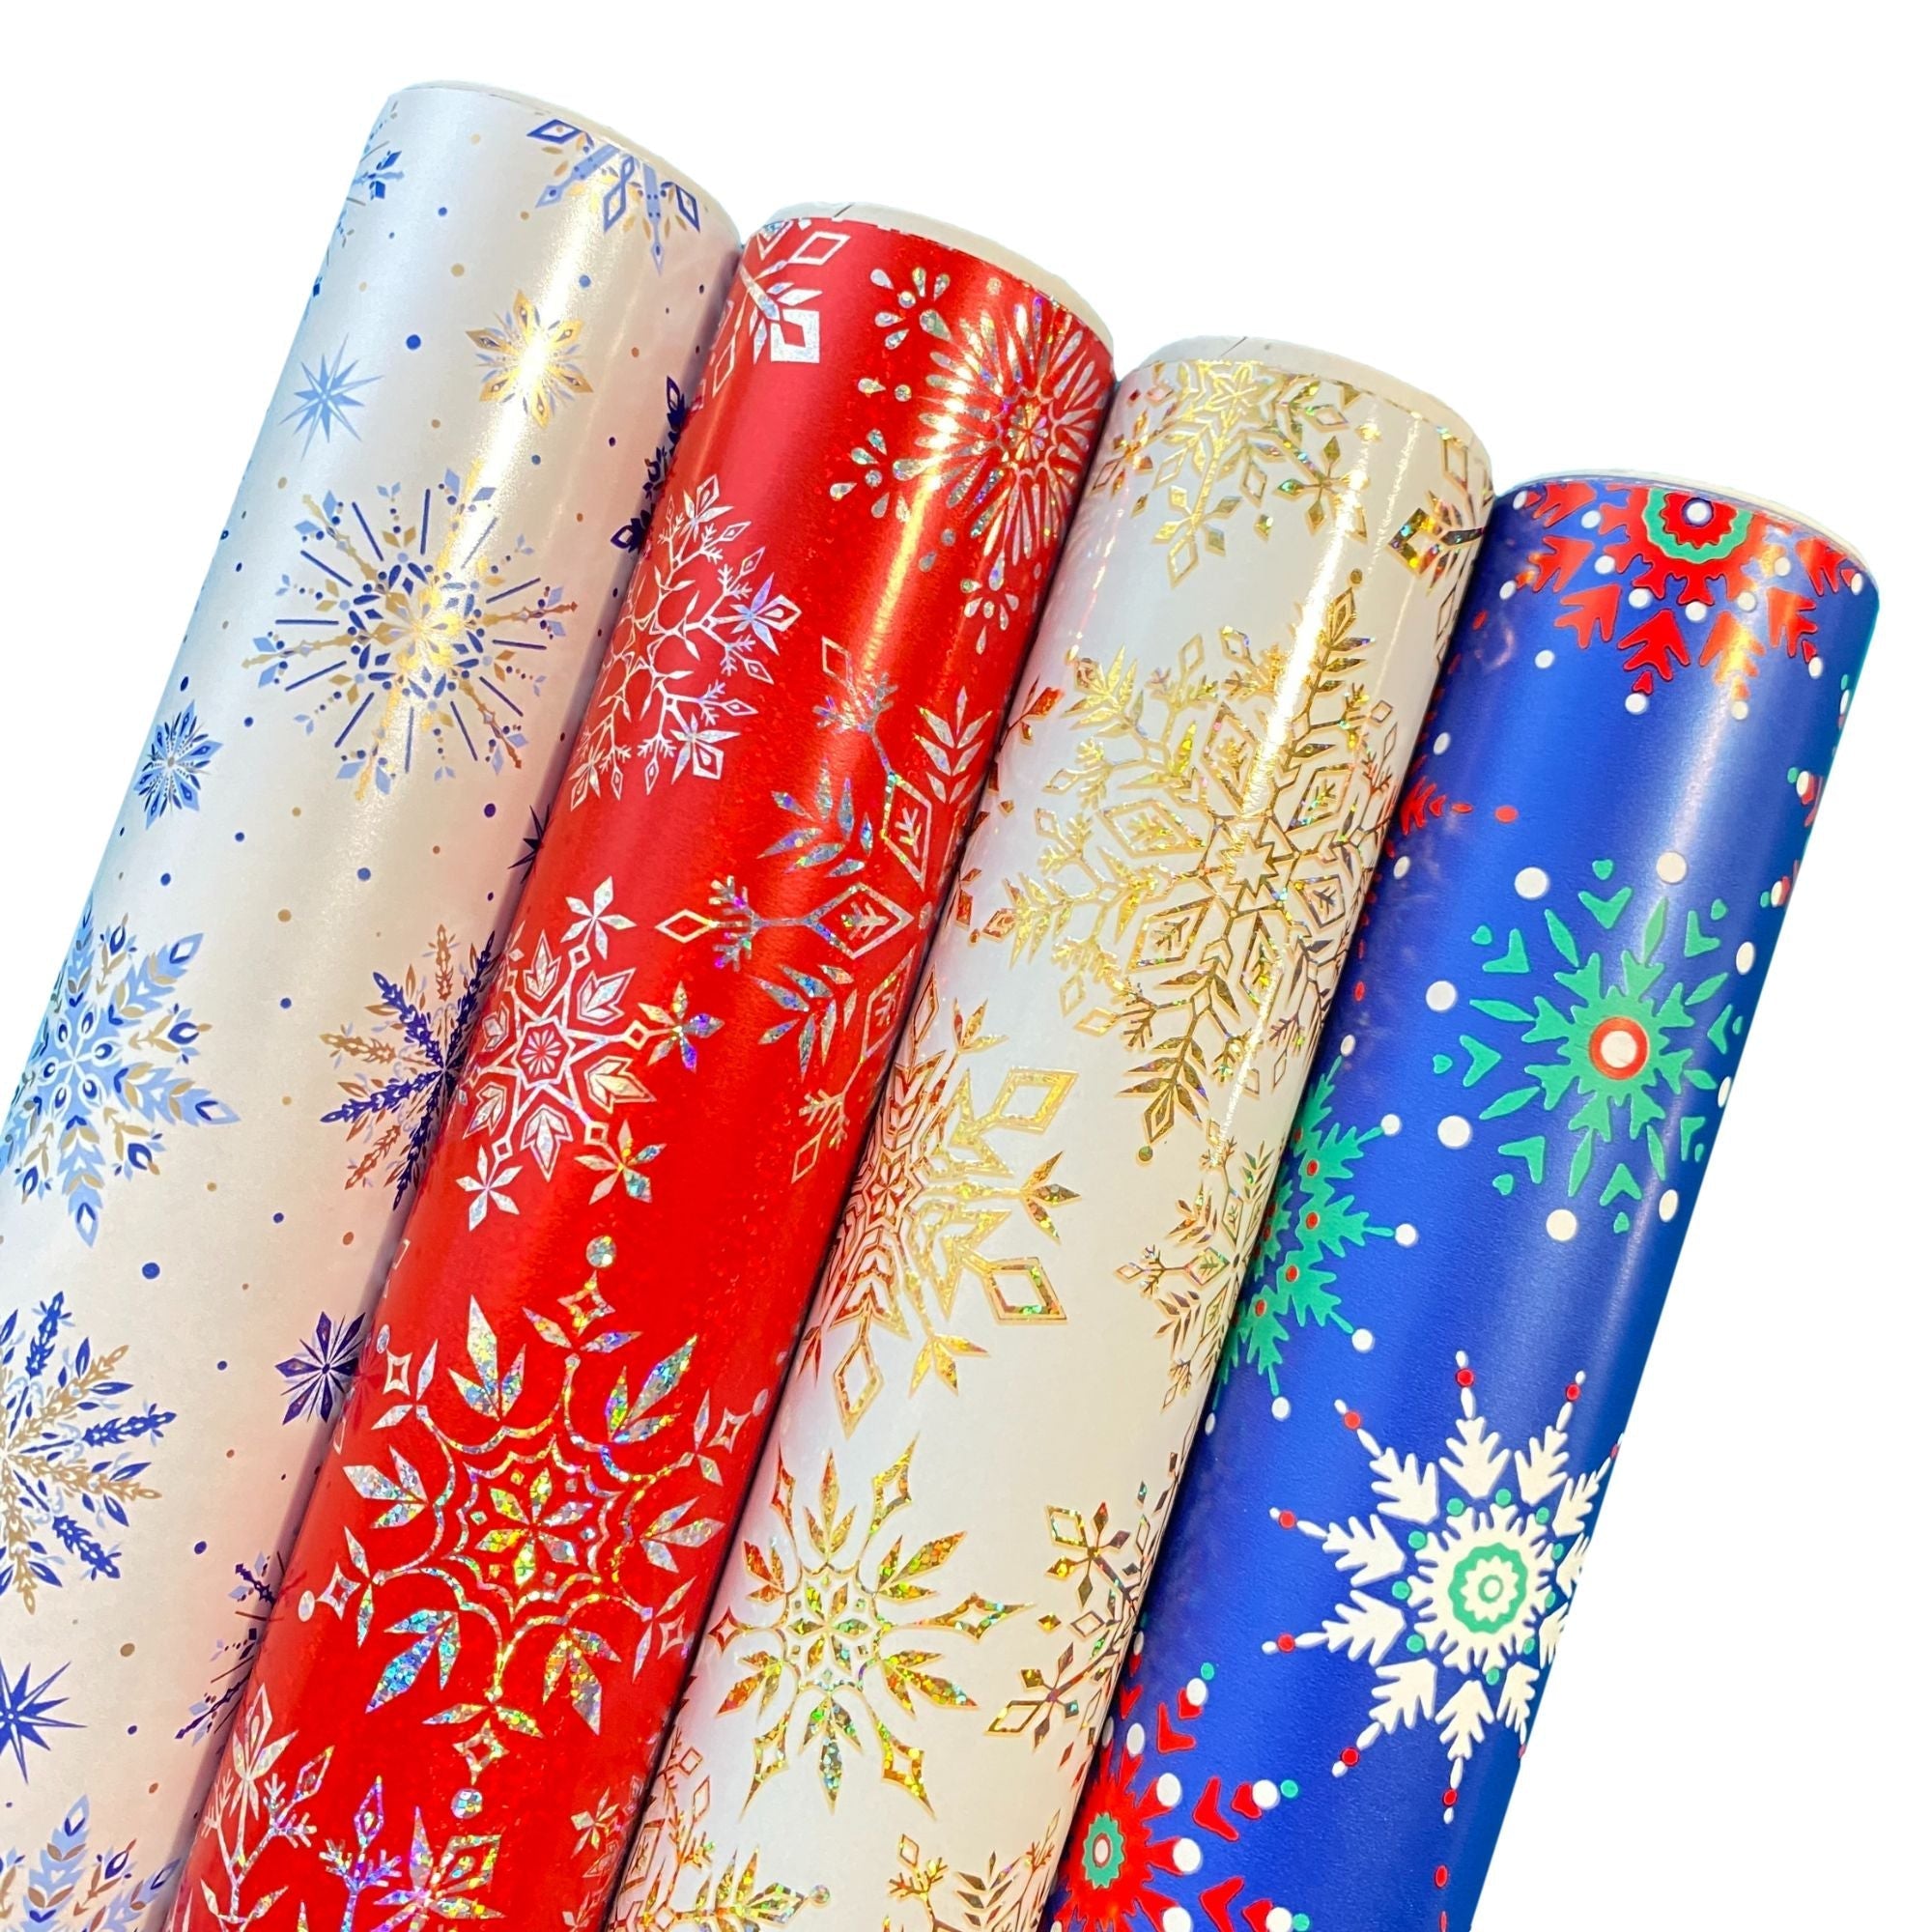 Christmas Wrapping Paper Snowflakes Roll Bundle (25 Sq ft per Roll, 100 Total Sq ft), 4 Pack Jillson & Roberts